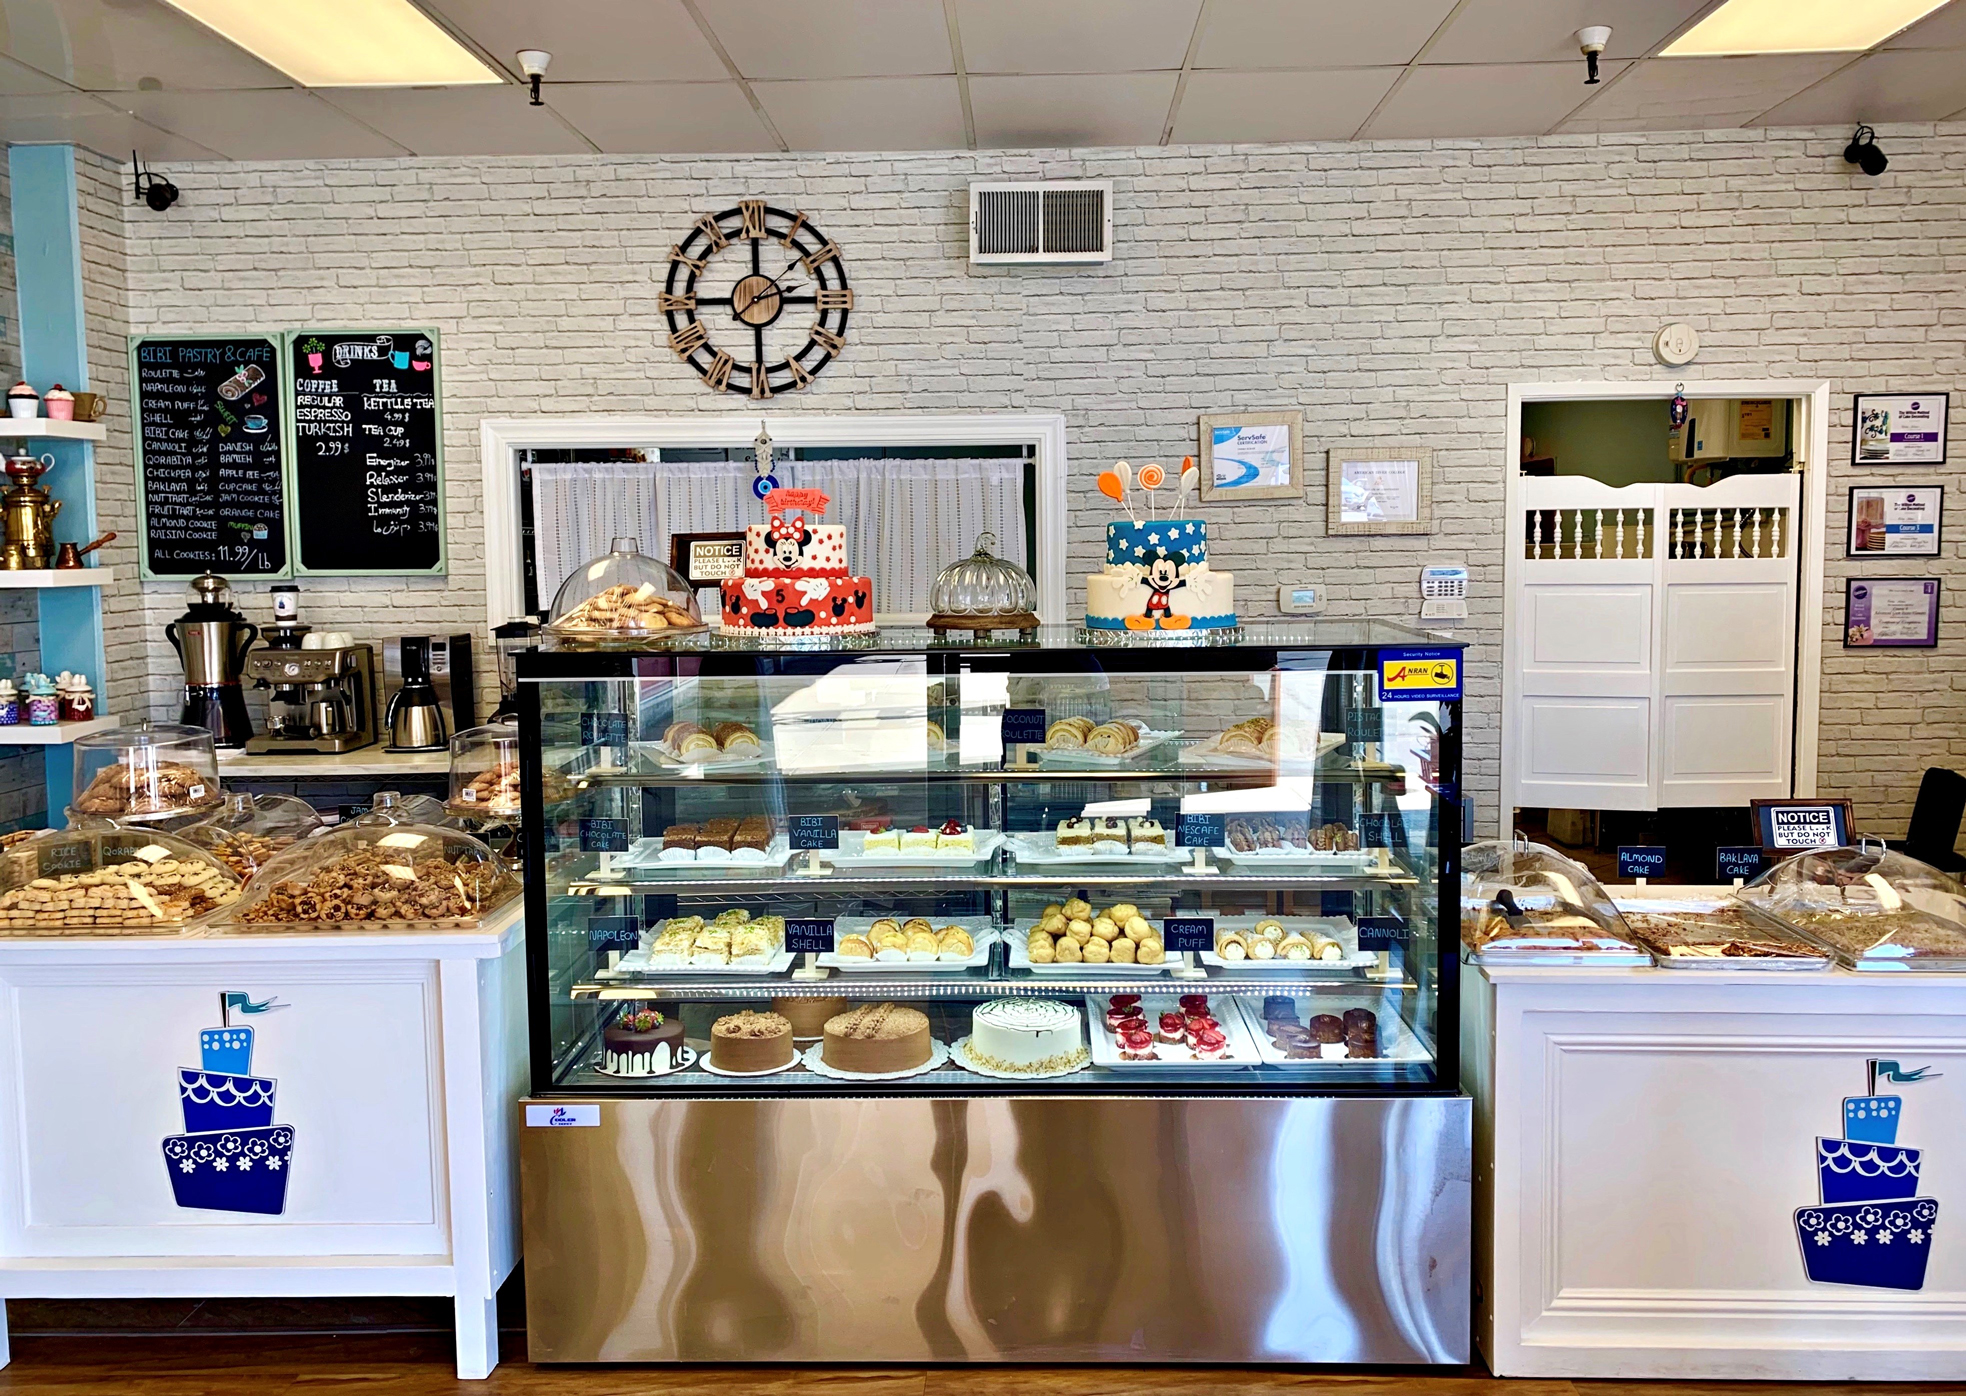 Bibi pastry and cafe Archives - Business Directory Site 2021 USA ...